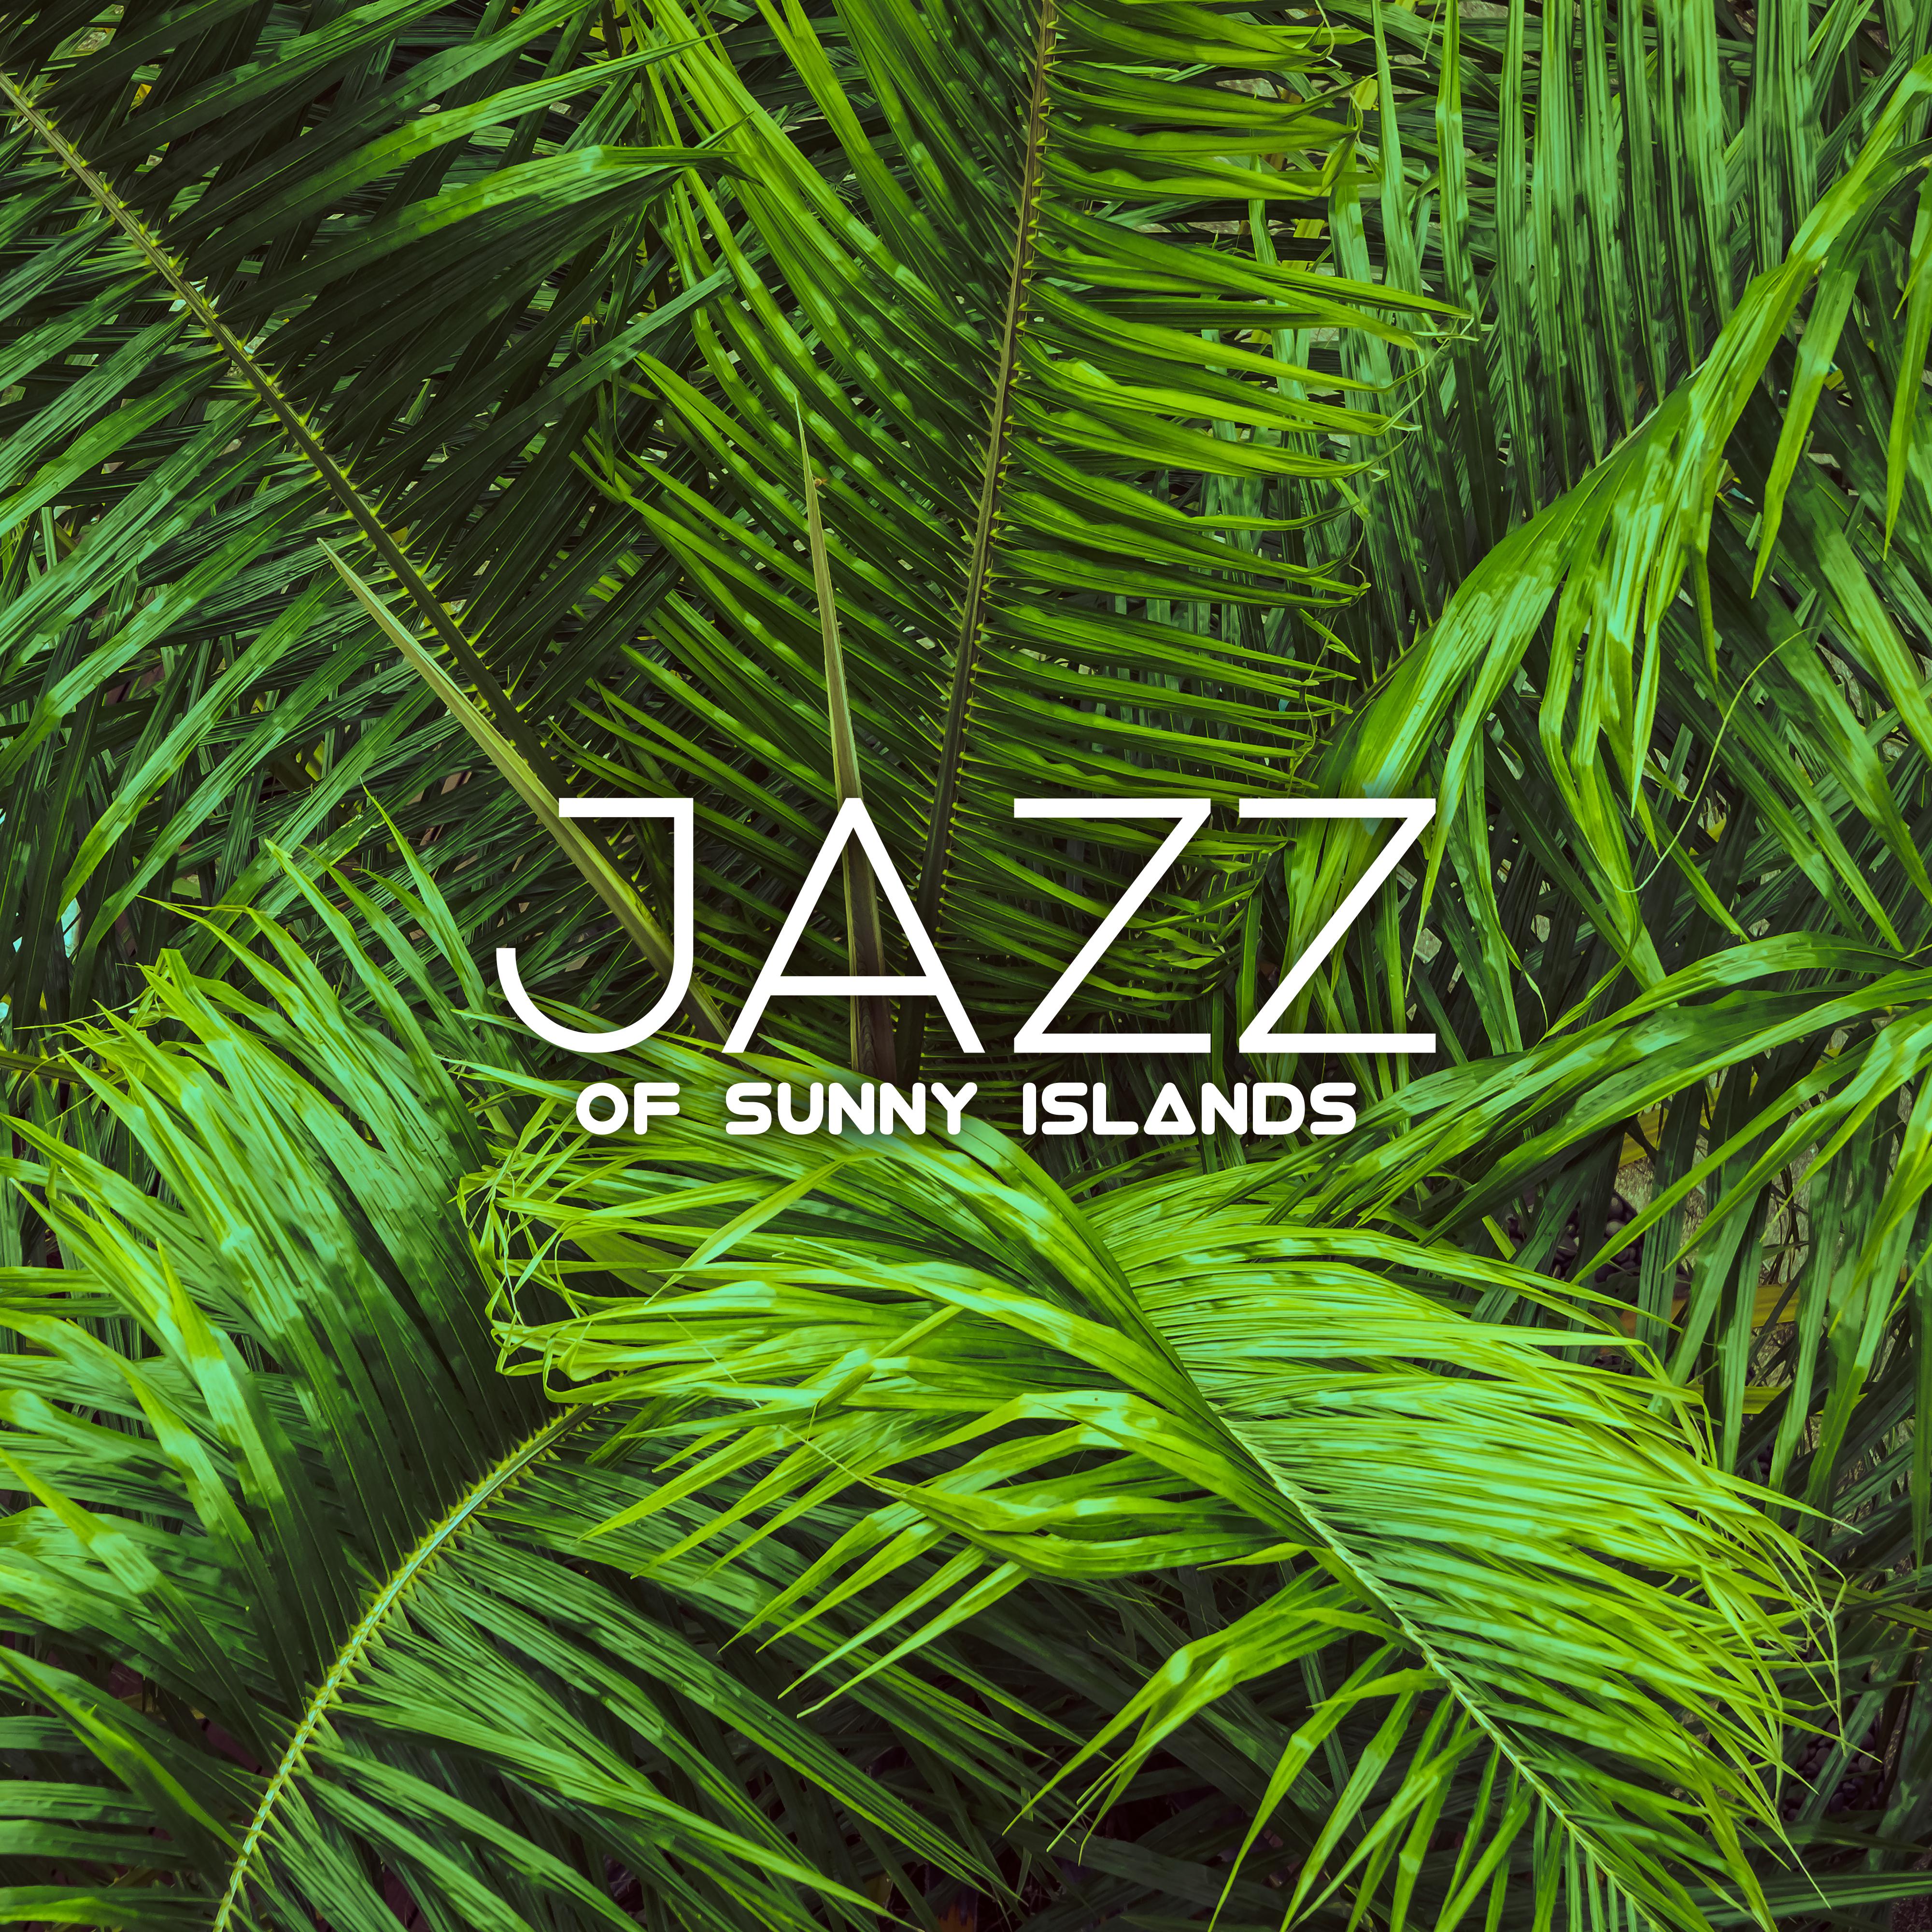 Jazz of Sunny Islands: Hot Melodies from Tropical Islands around the World